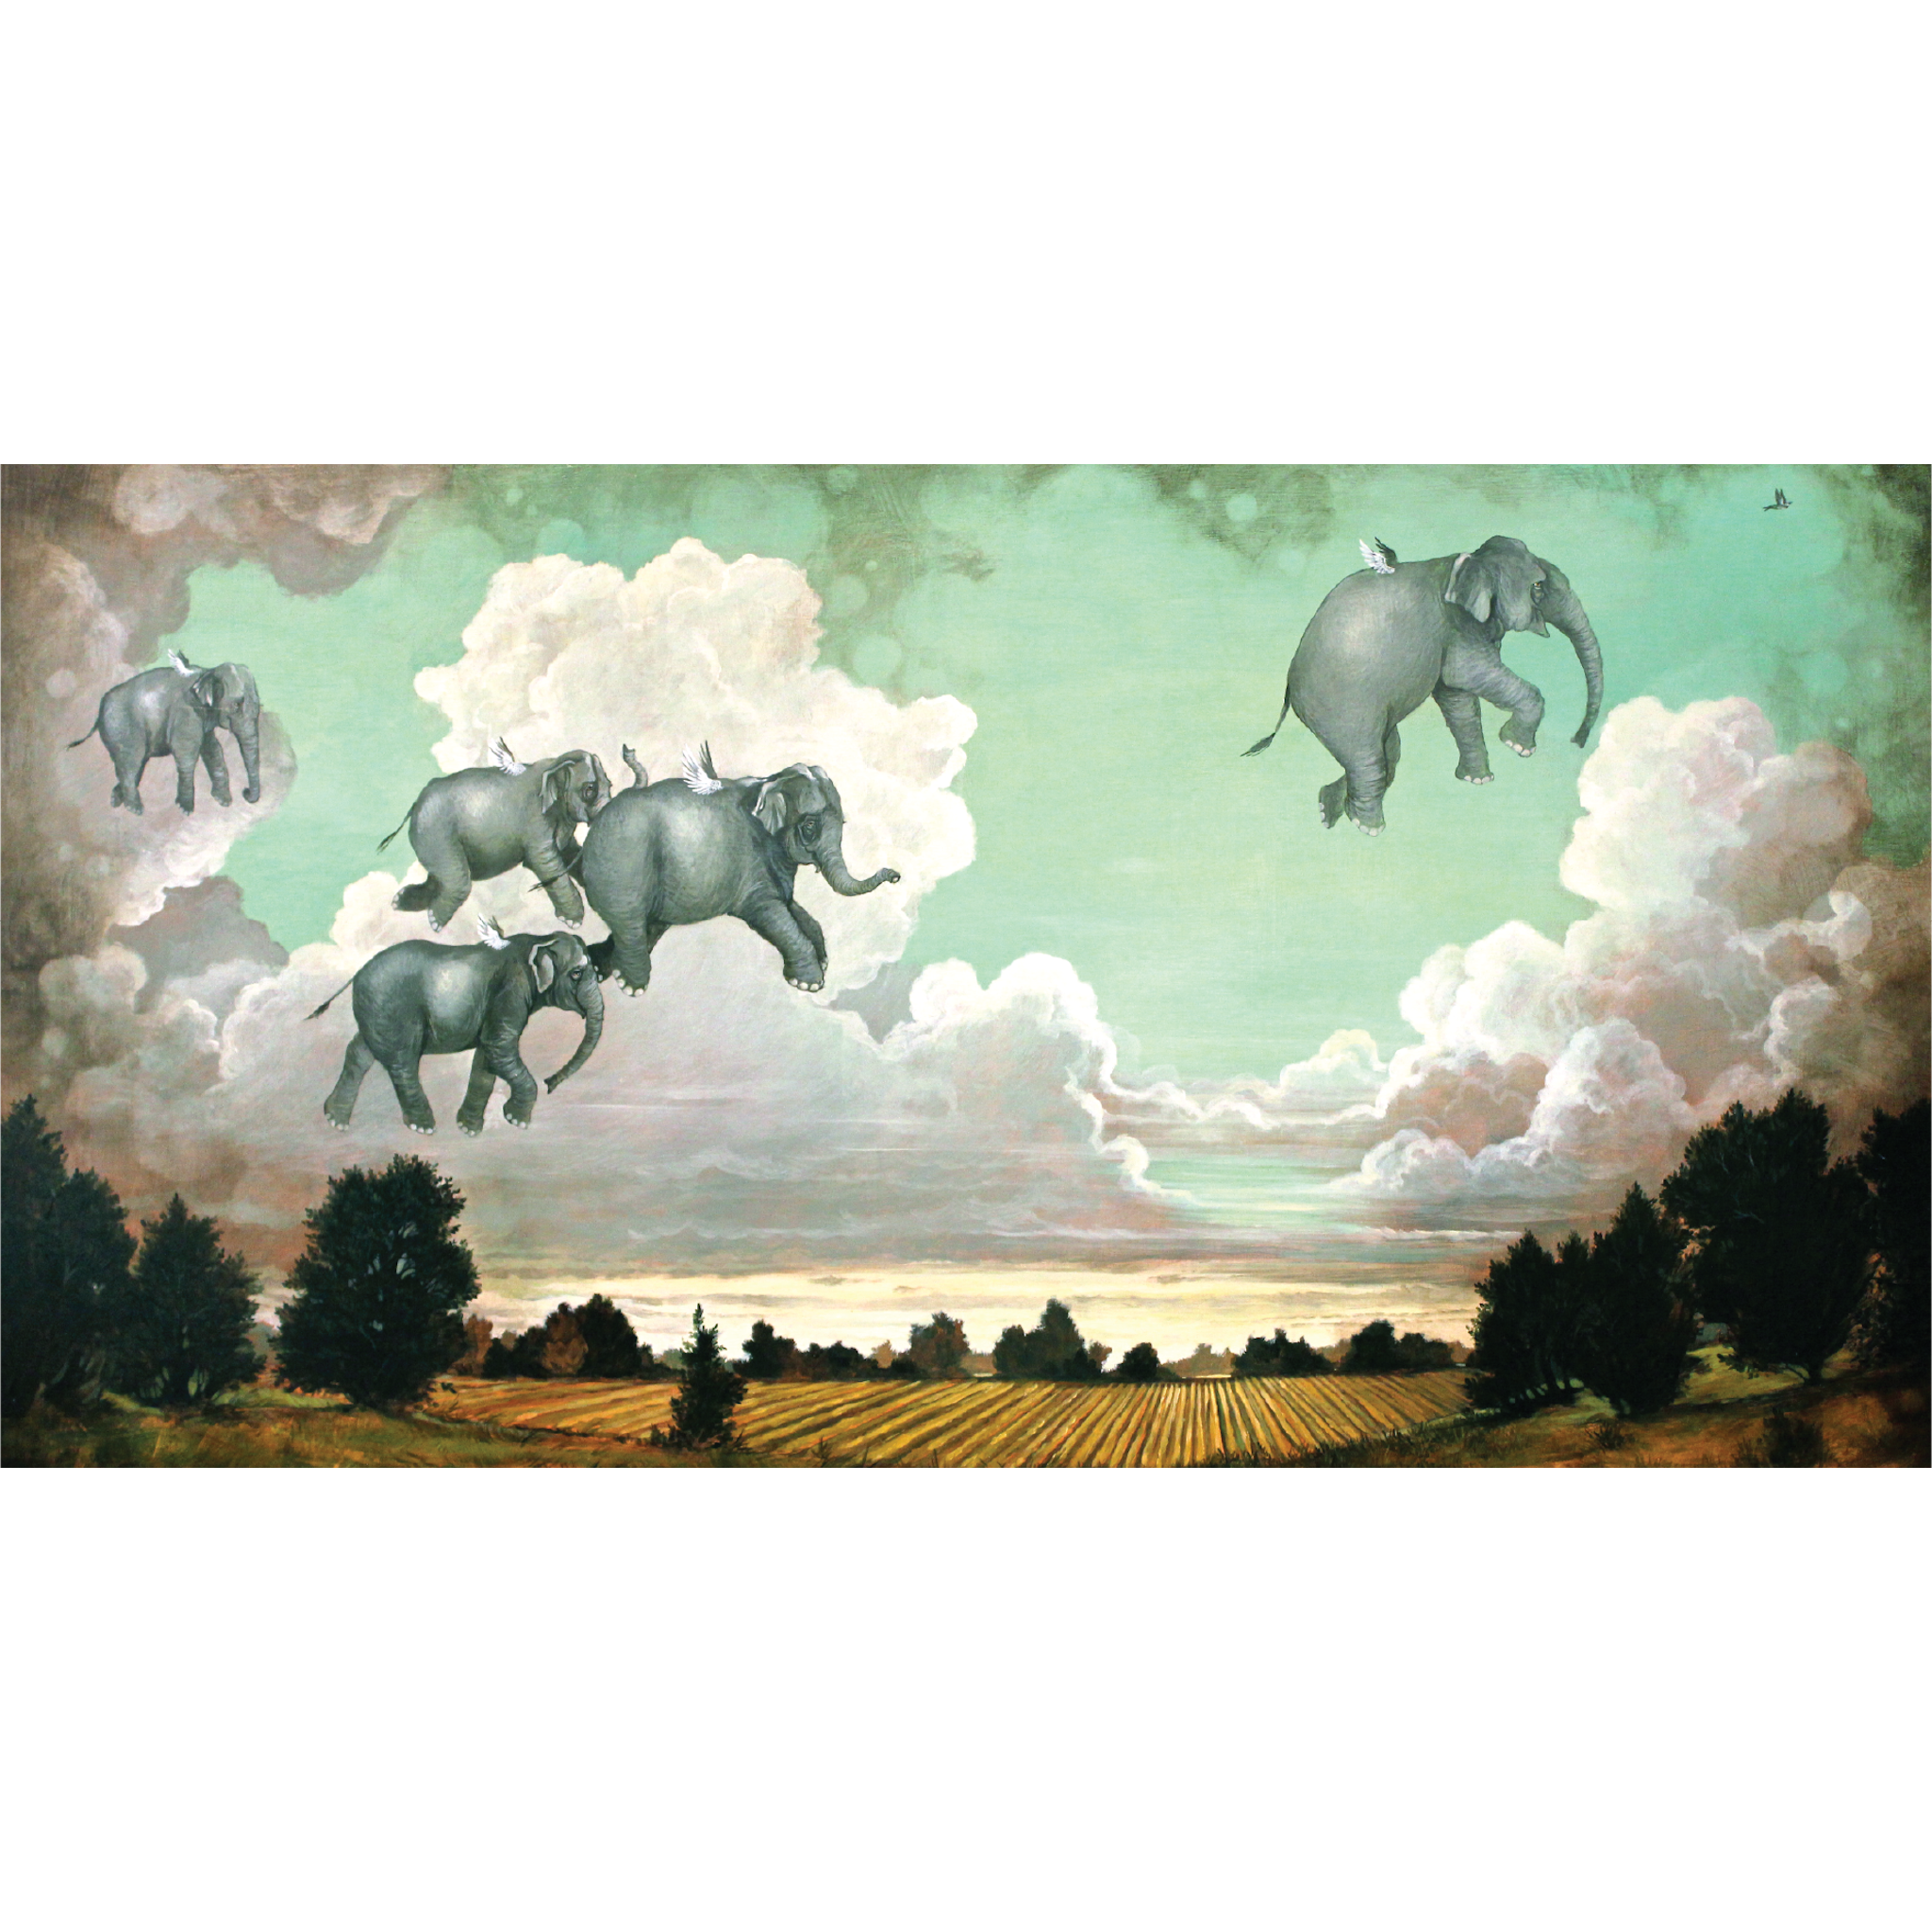 A whimsical illustration of five gray elephants flying through a cloudy teal sky with small white wings over a farm landscape.